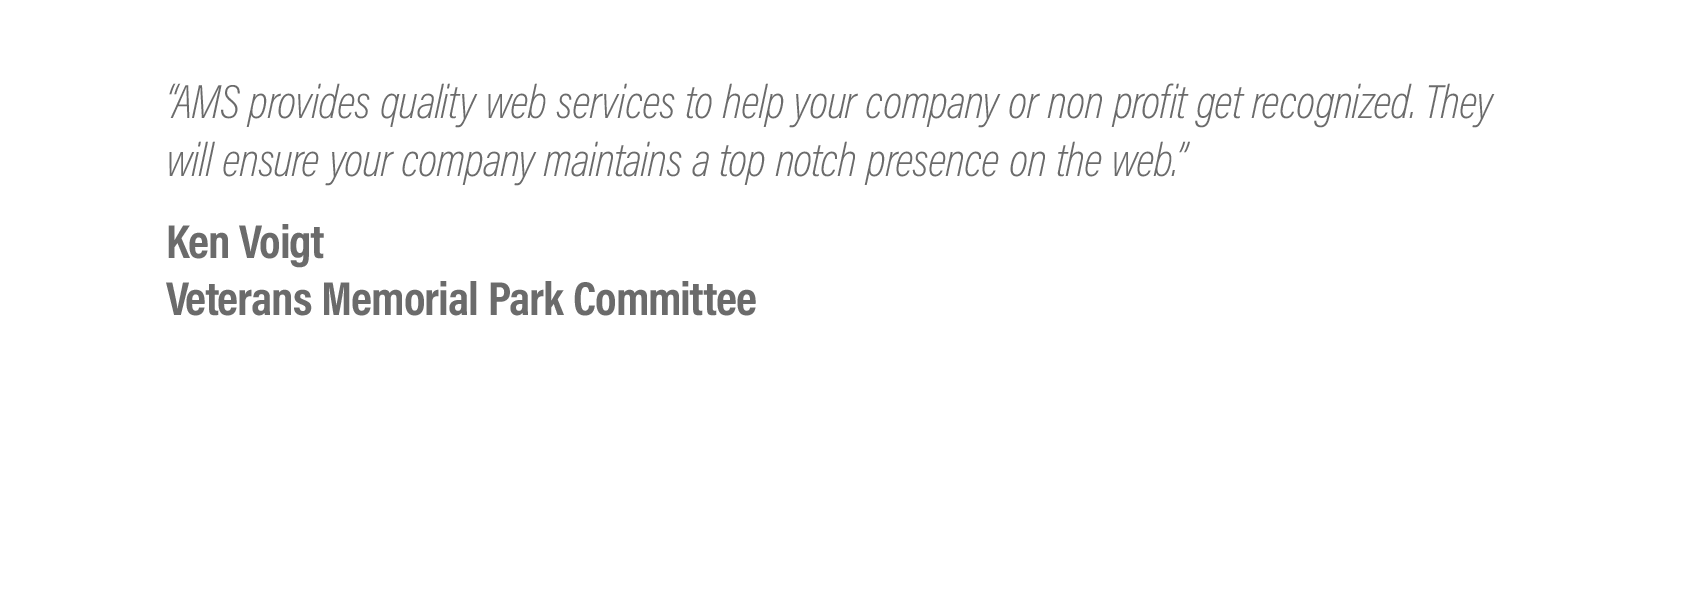  “AMS provides quality web services to help your company or non profit get recognized. They will ensure your company maintains a top notch presence on the web.”  Ken Voigt - Veterans Memorial Park Committee 